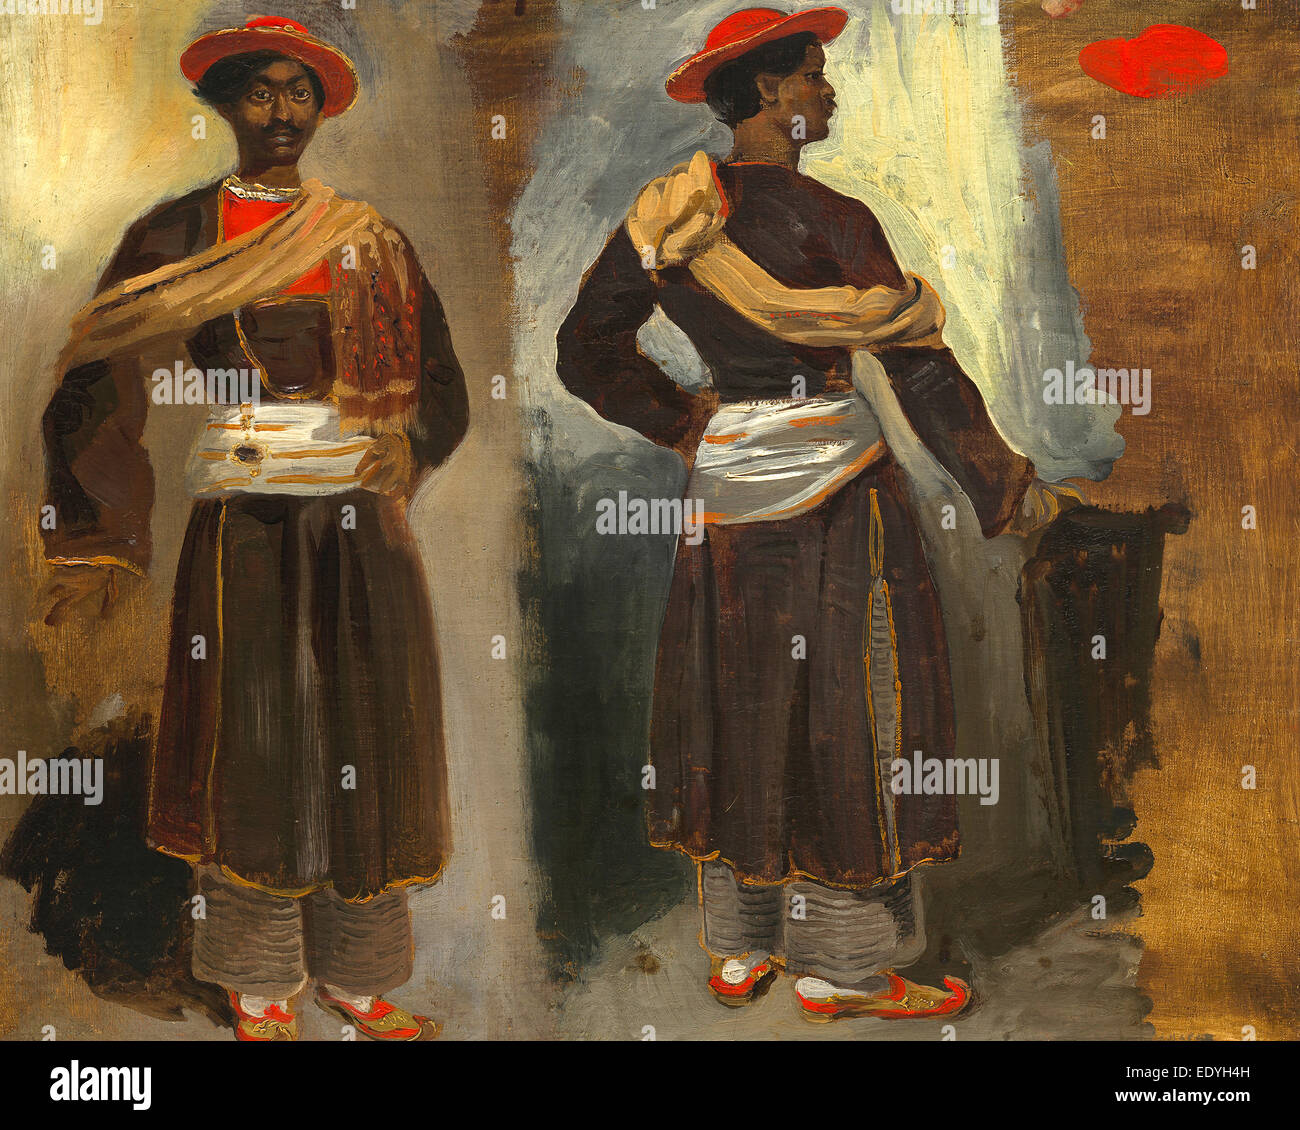 Eugène Delacroix (French, 1798 - 1863), Two Studies of a Standing Indian from Calcutta, c. 1823-1824, oil on canvas Stock Photo